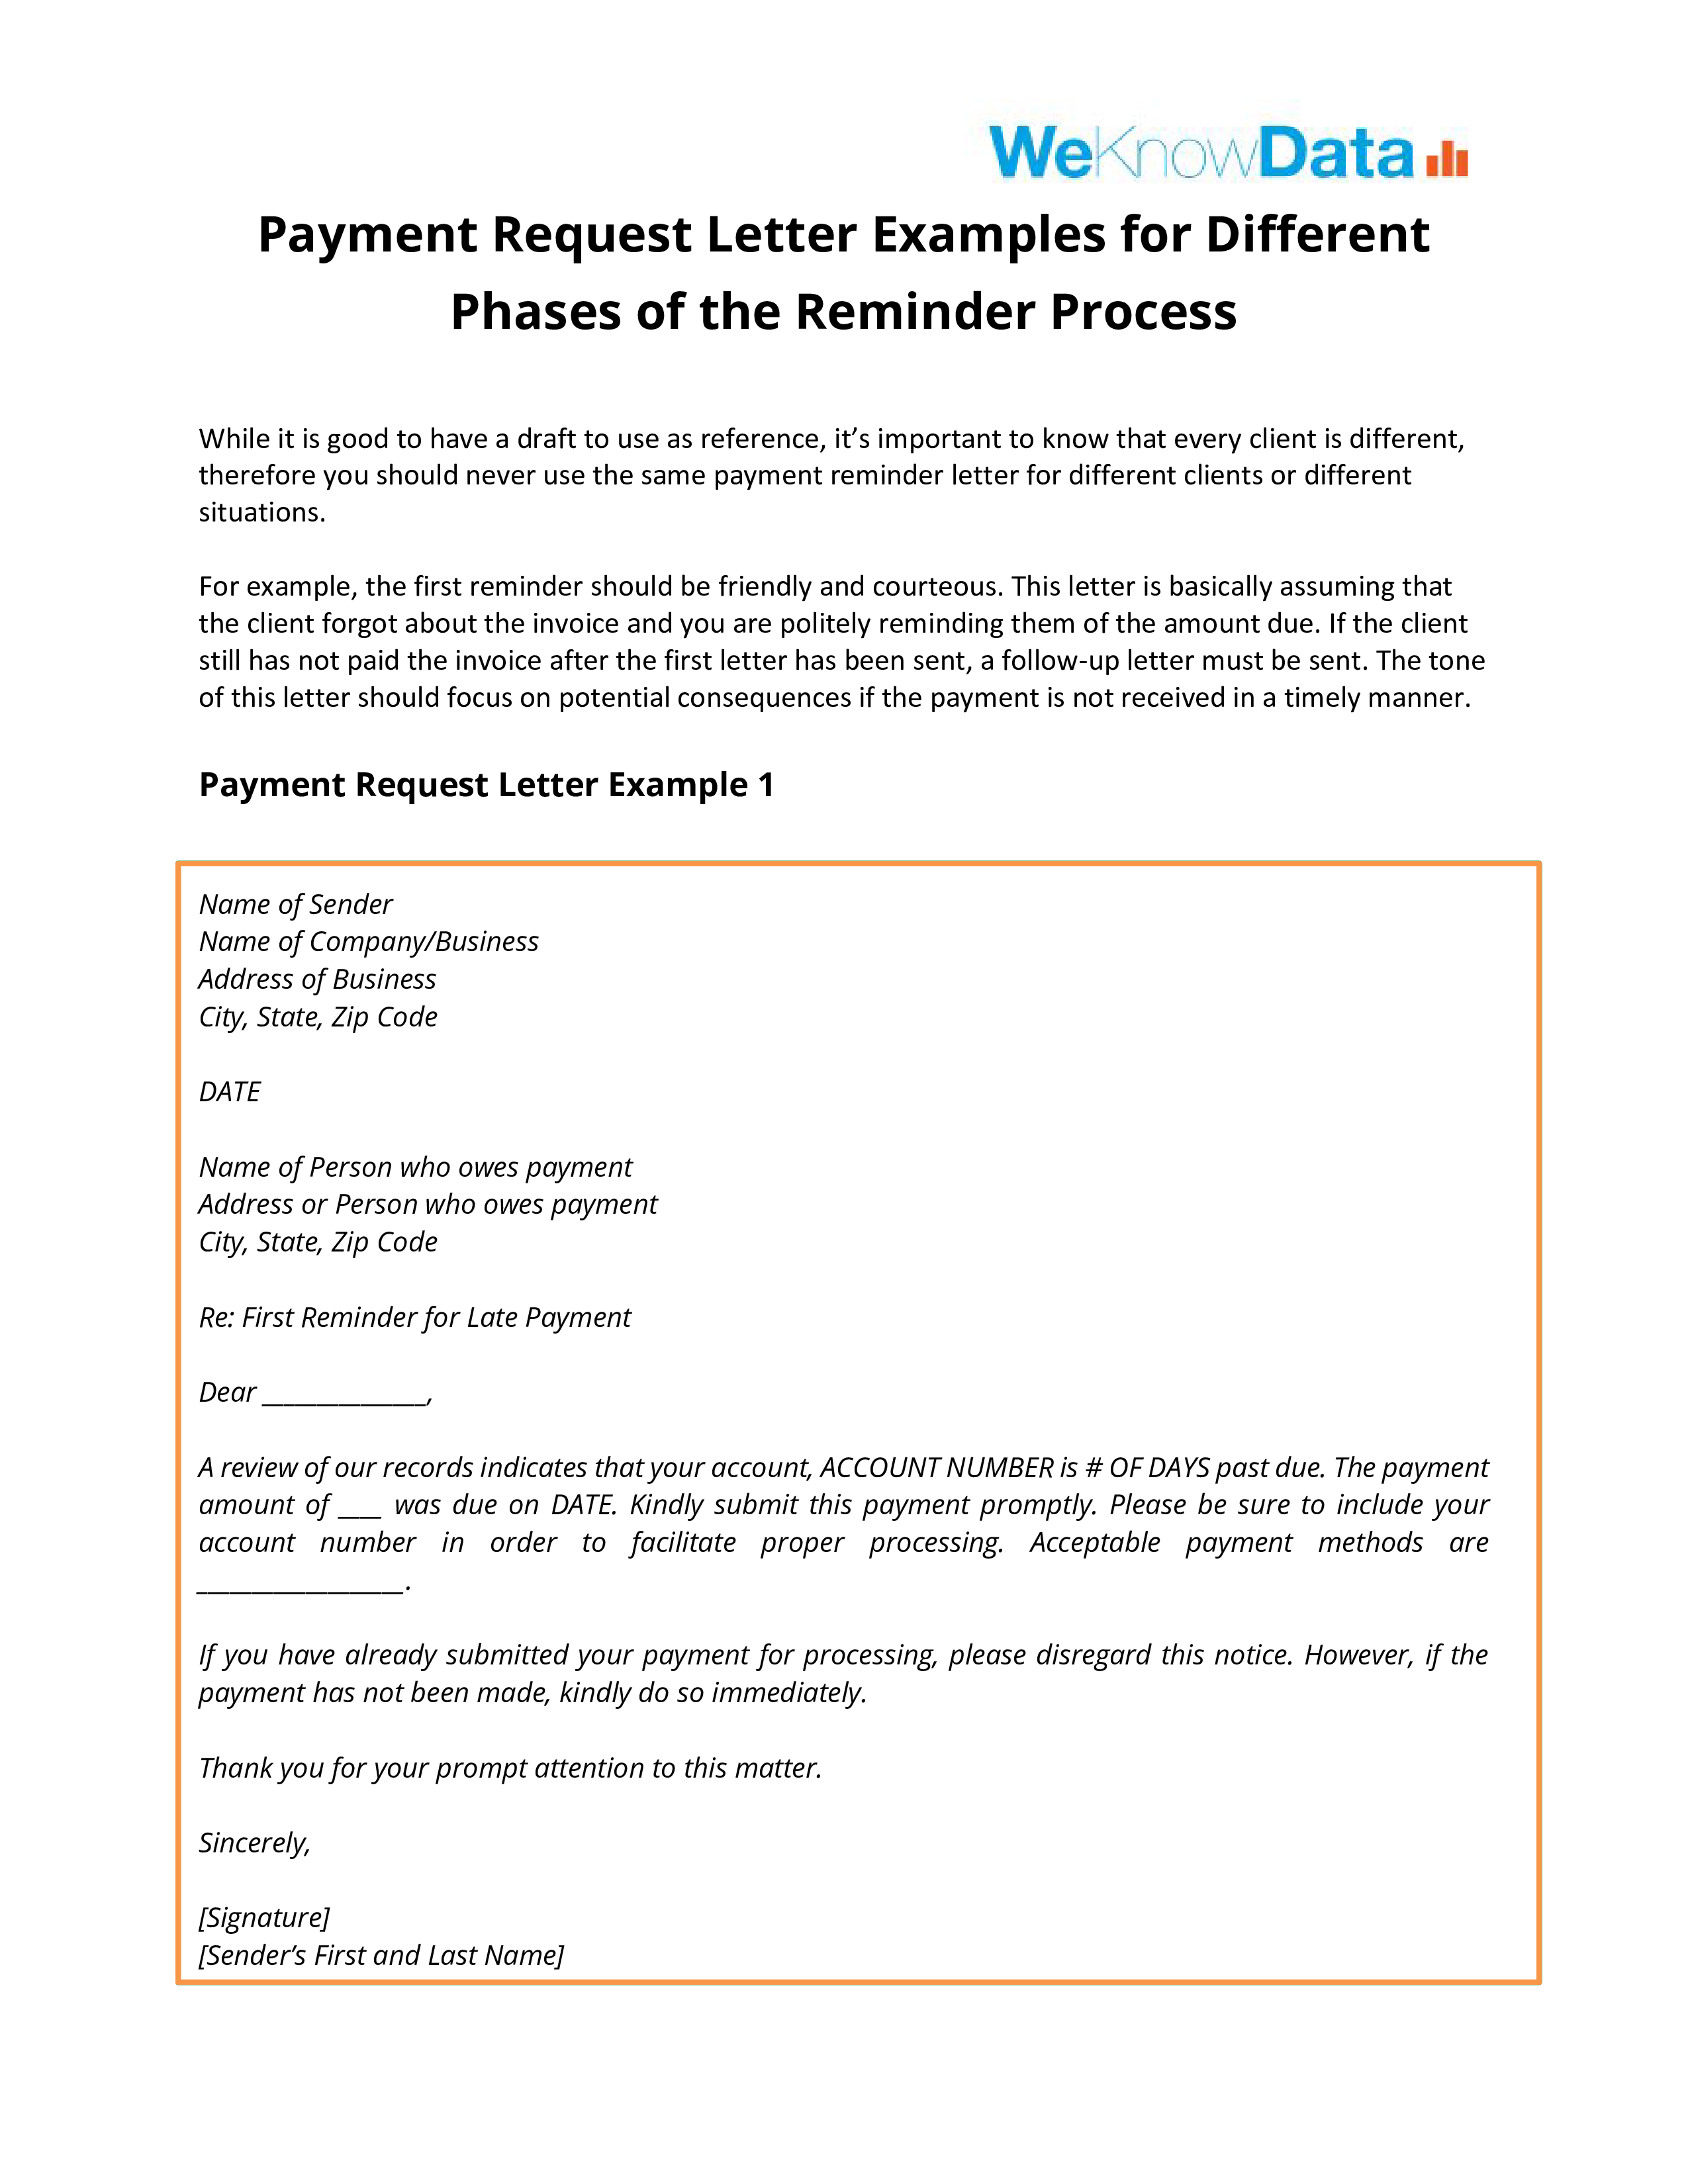 Payment Request Letter Format Templates at